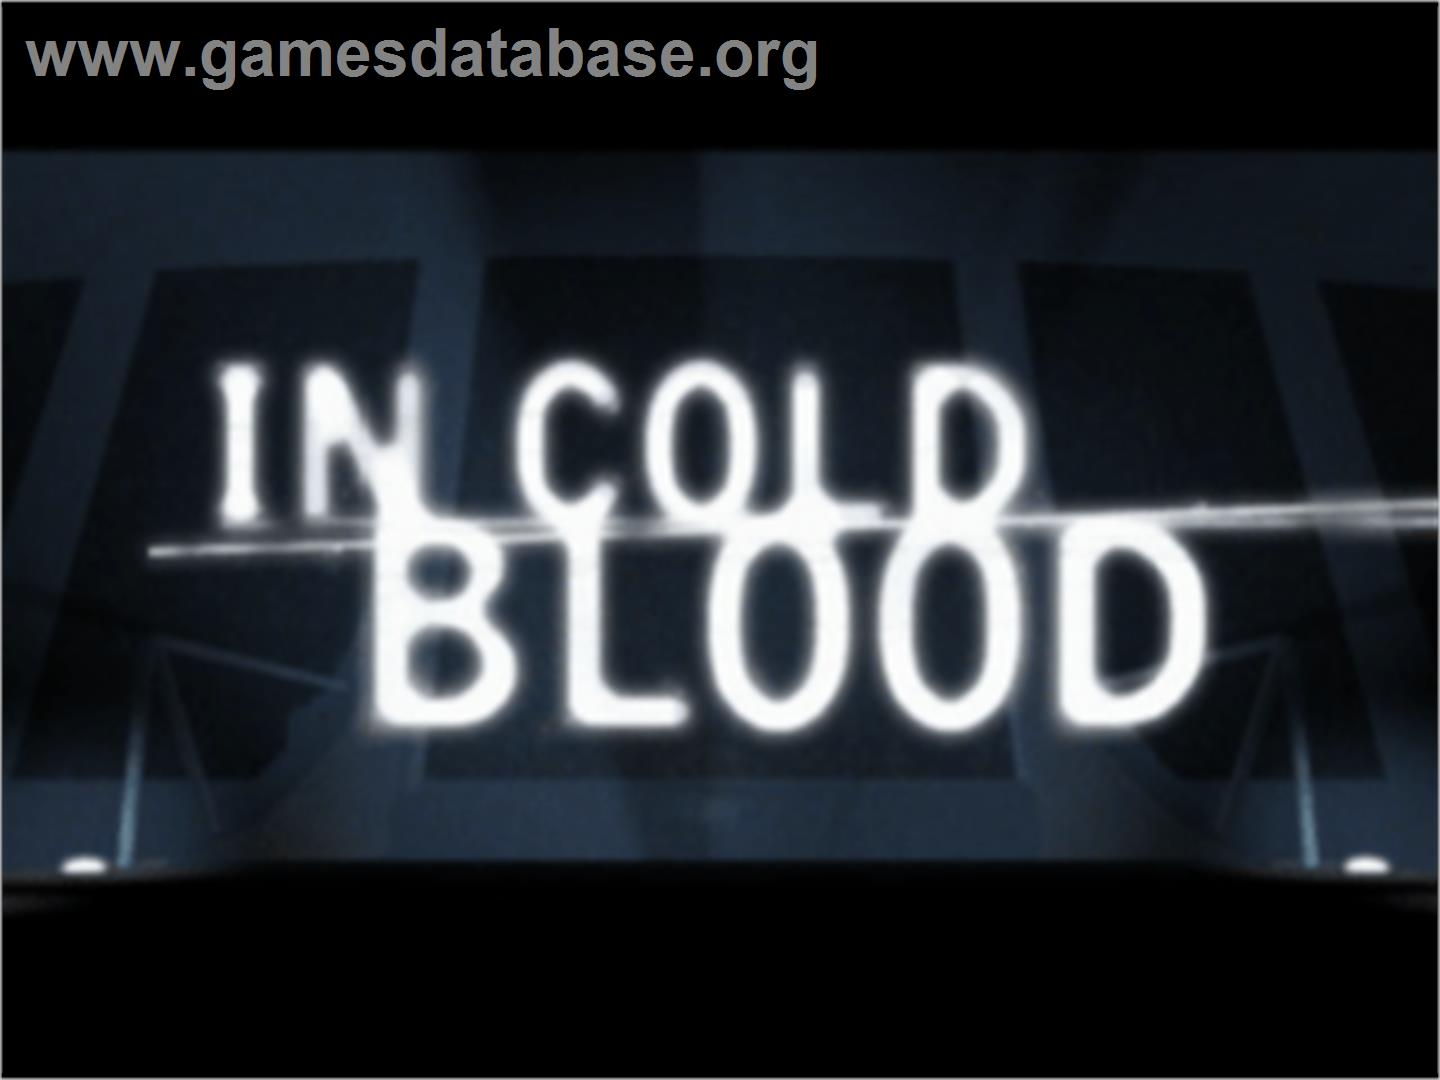 In Cold Blood - Sony Playstation - Artwork - Title Screen